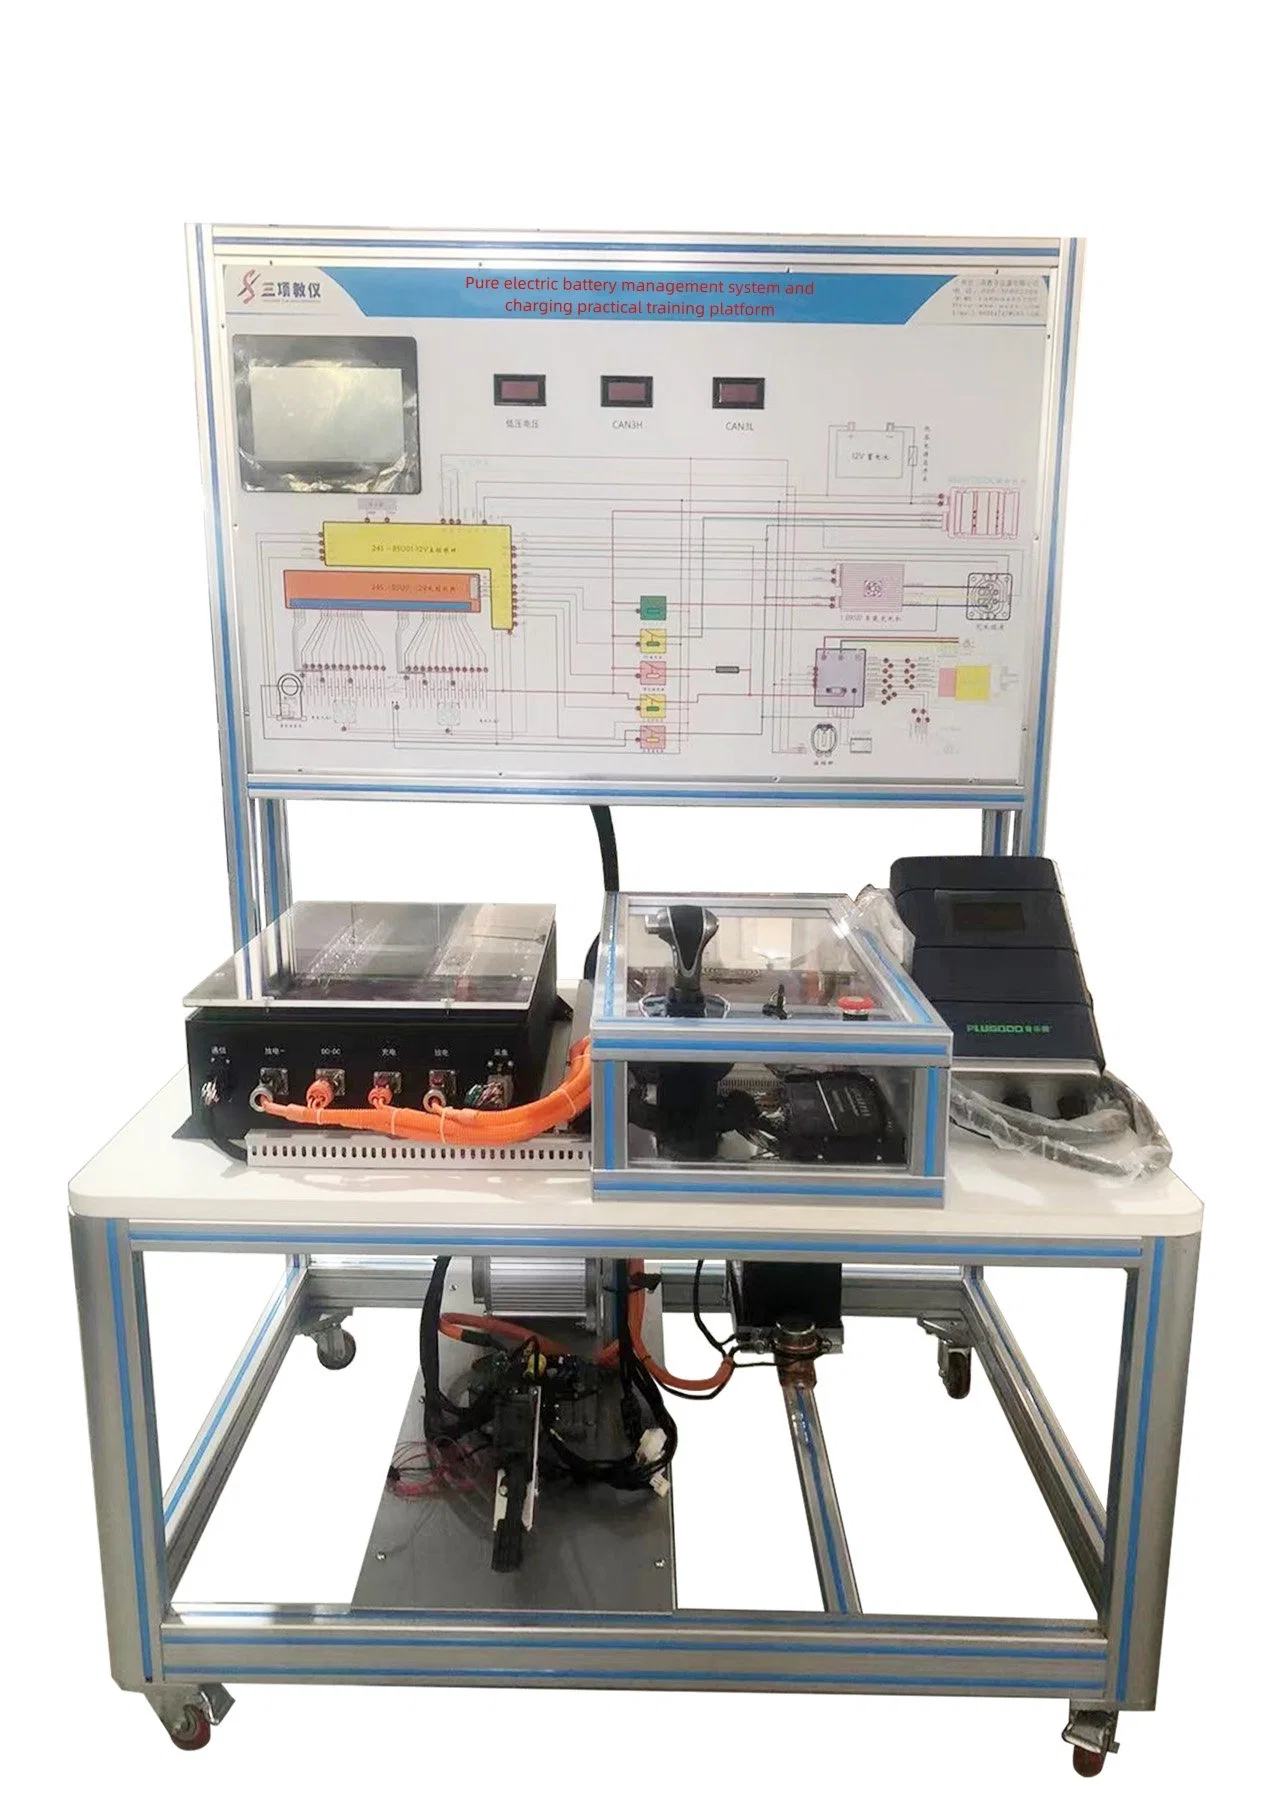 Pure Electric Battery Management System and Charging Training Platform School Laboratory Equipment Educational